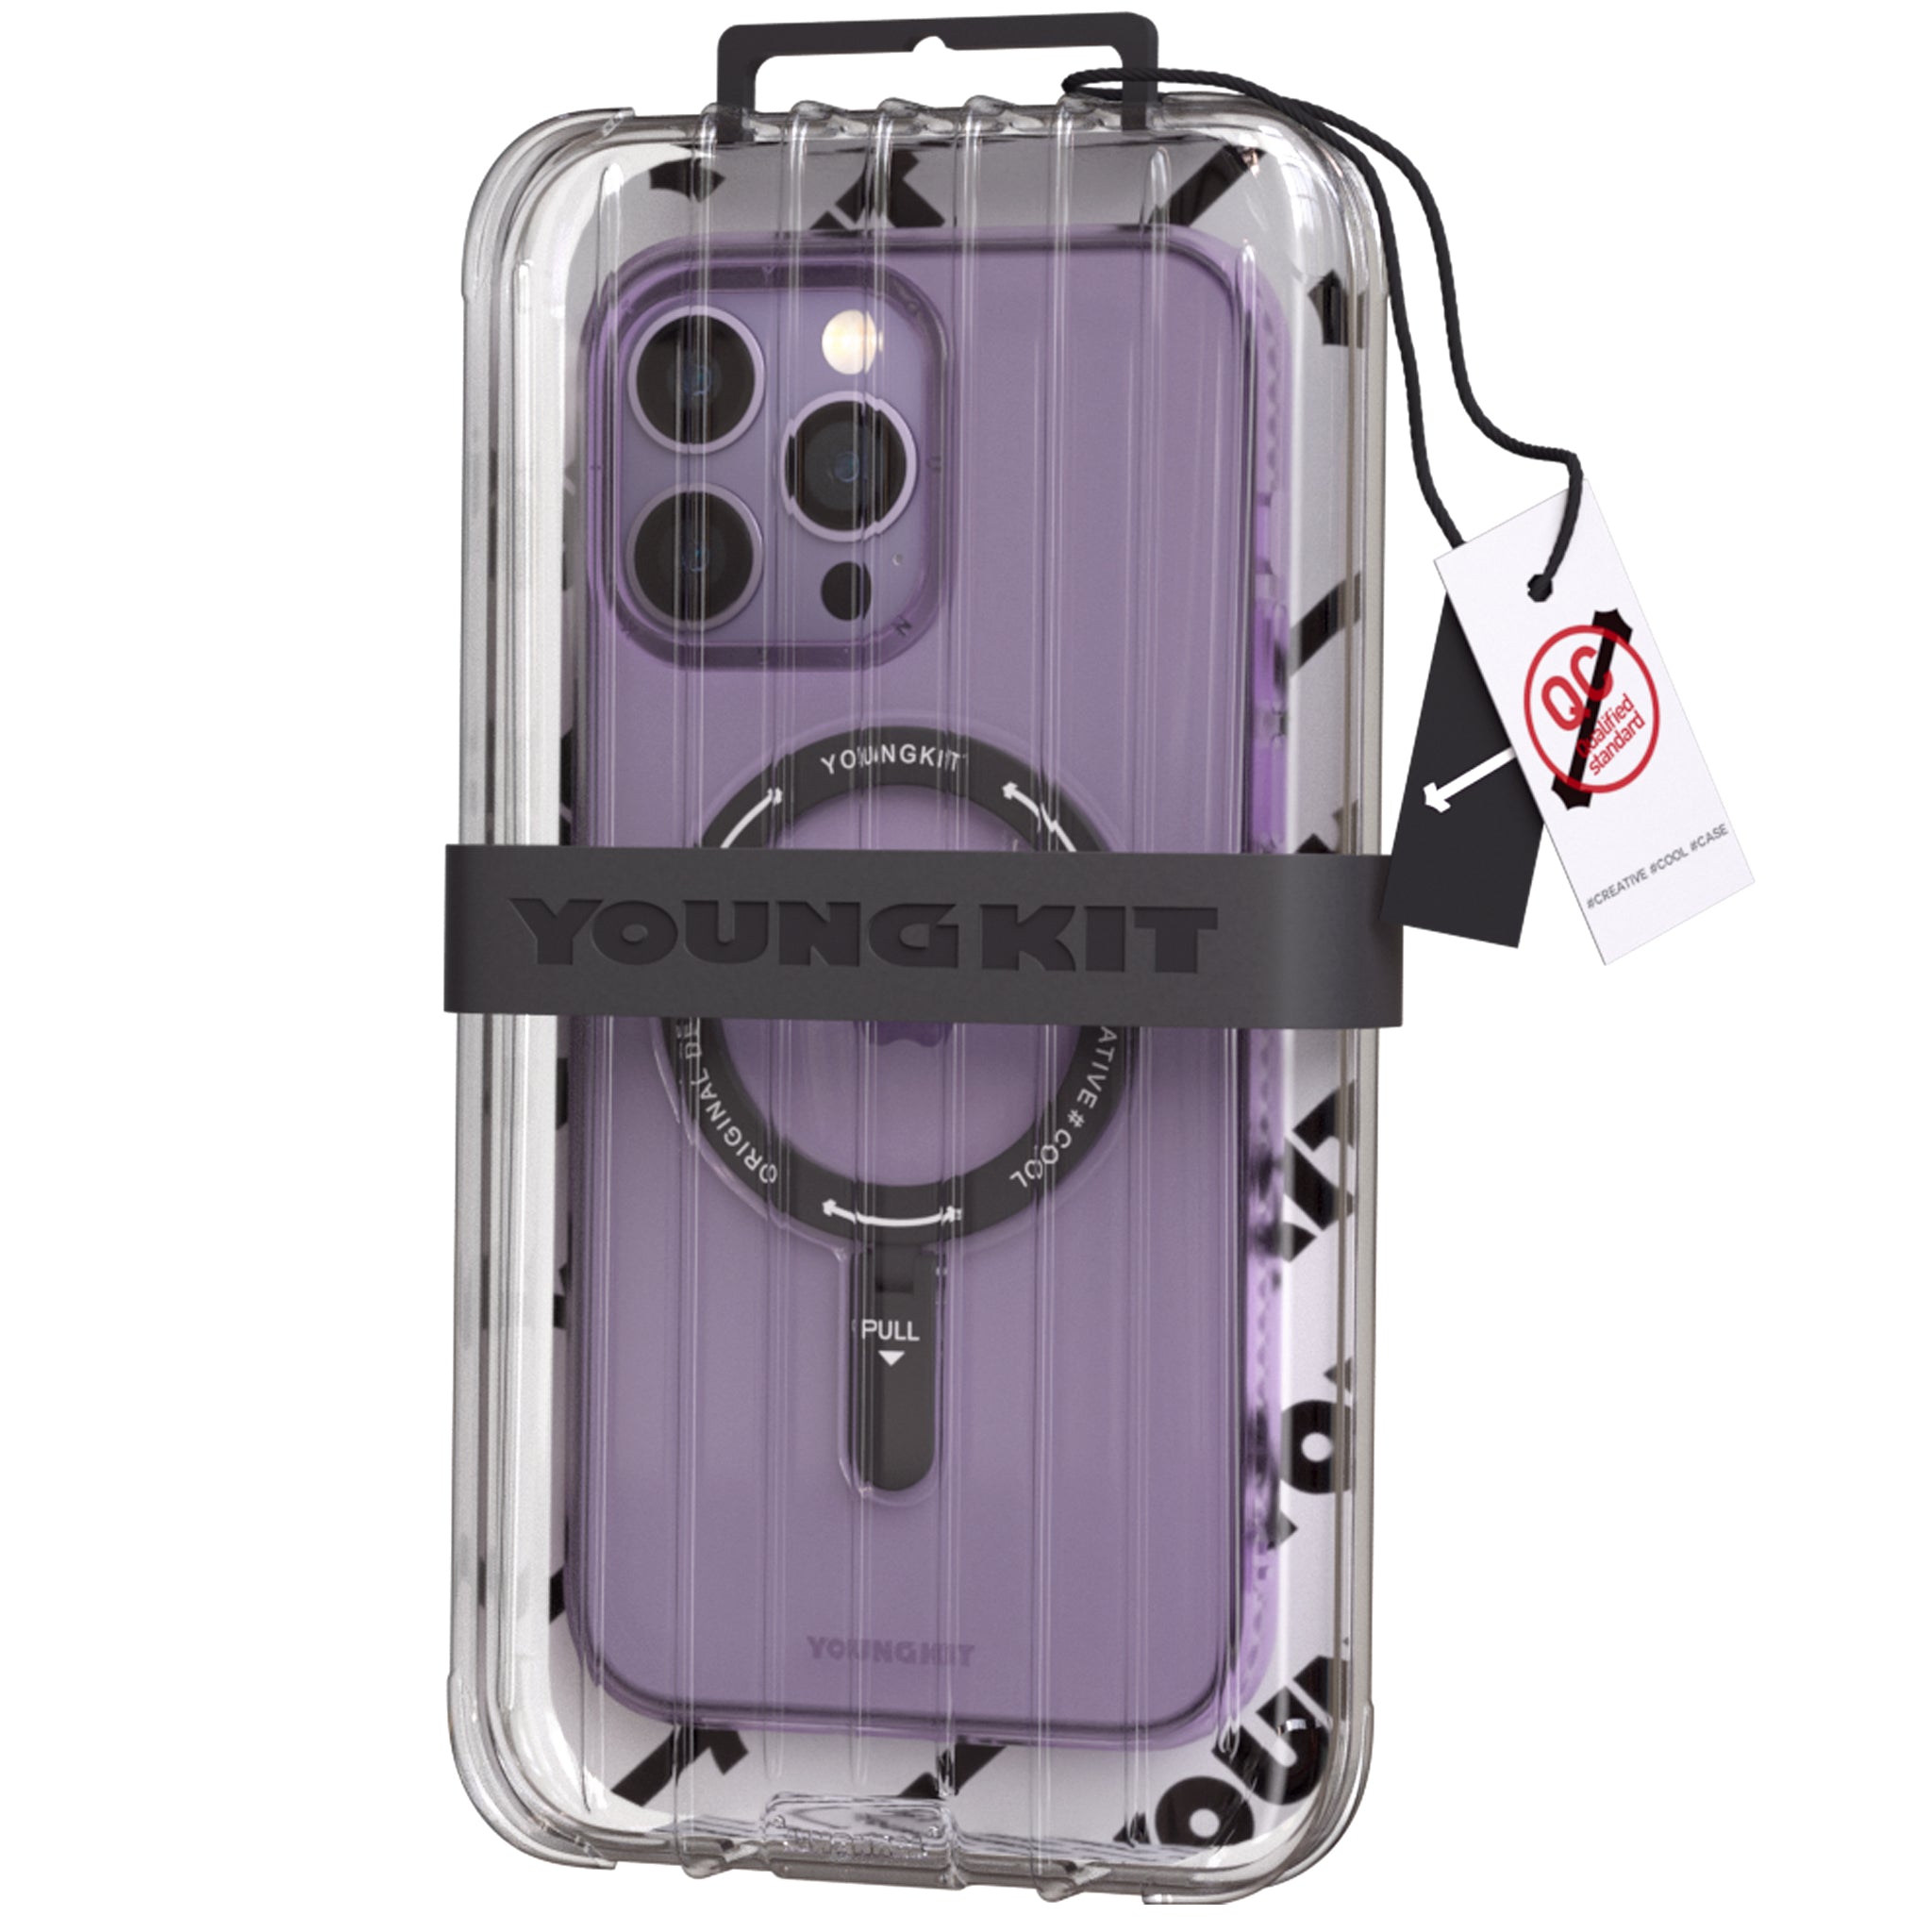 Rock Frosted Multifunctional Stand Case